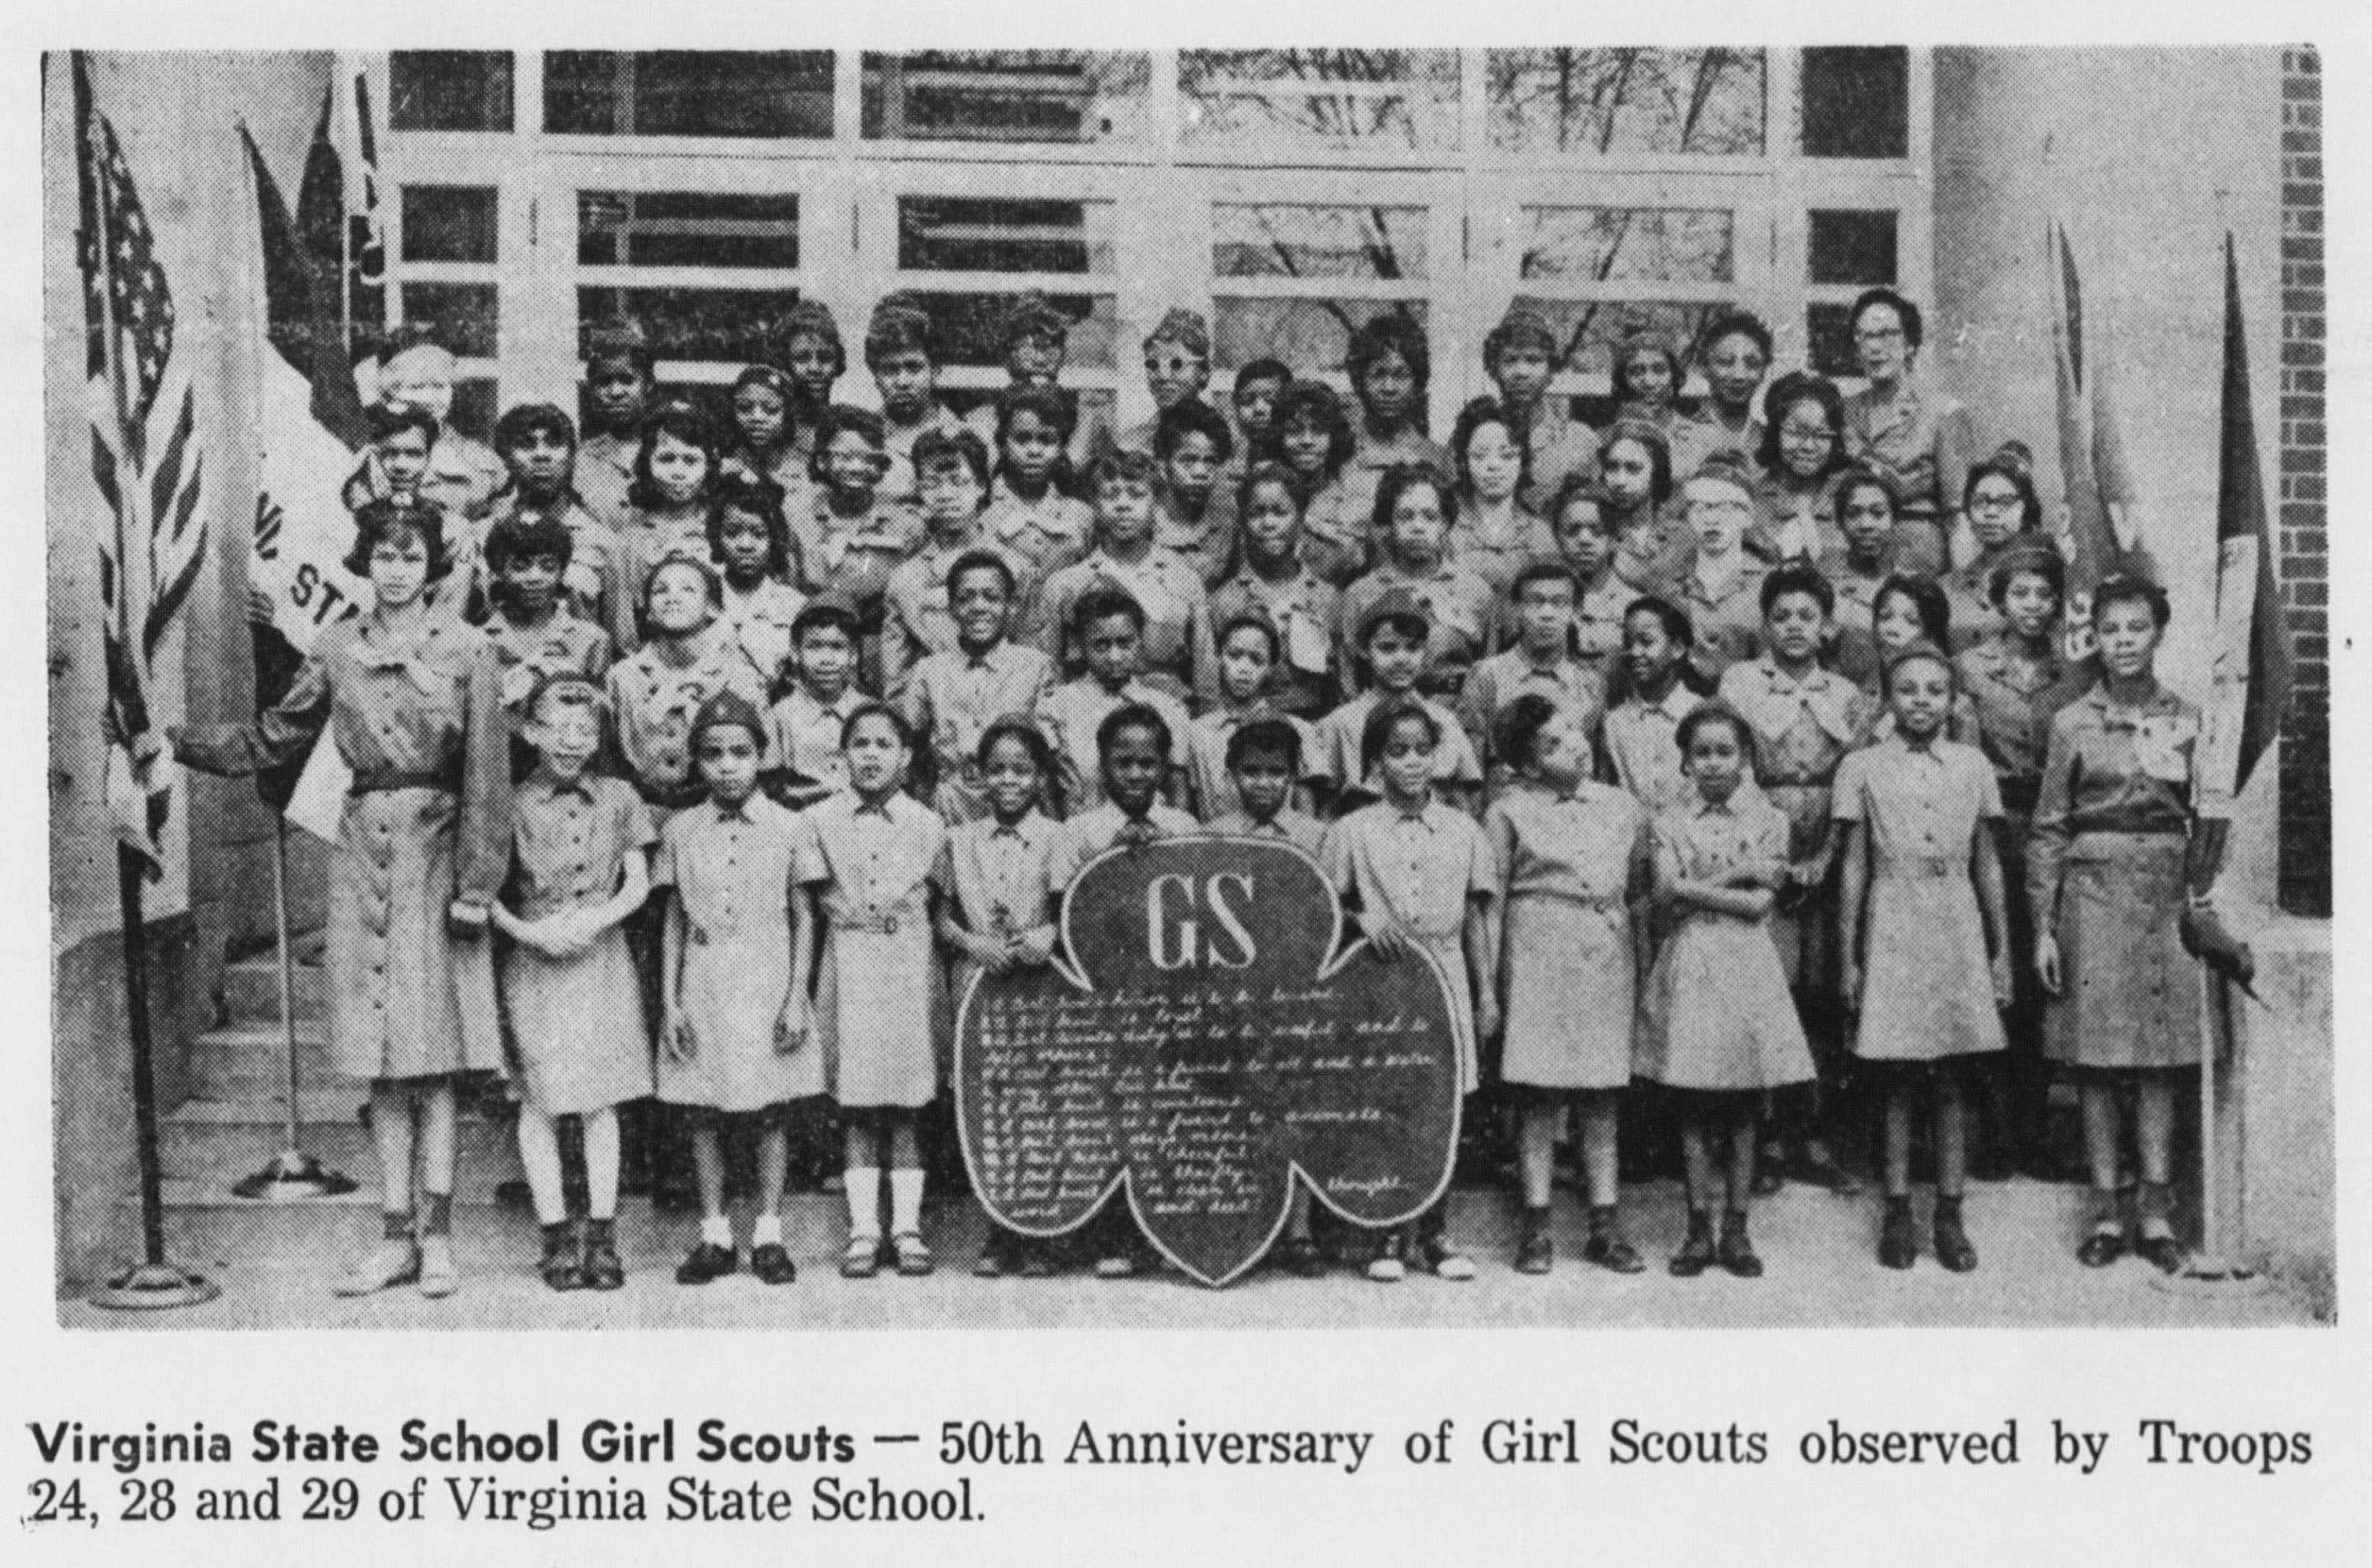 Virginia State School Girl Scouts - 50th Anniversary of Girl Scouts observed by Troops 24, 28, and 29 of Virginia State School. More description below.